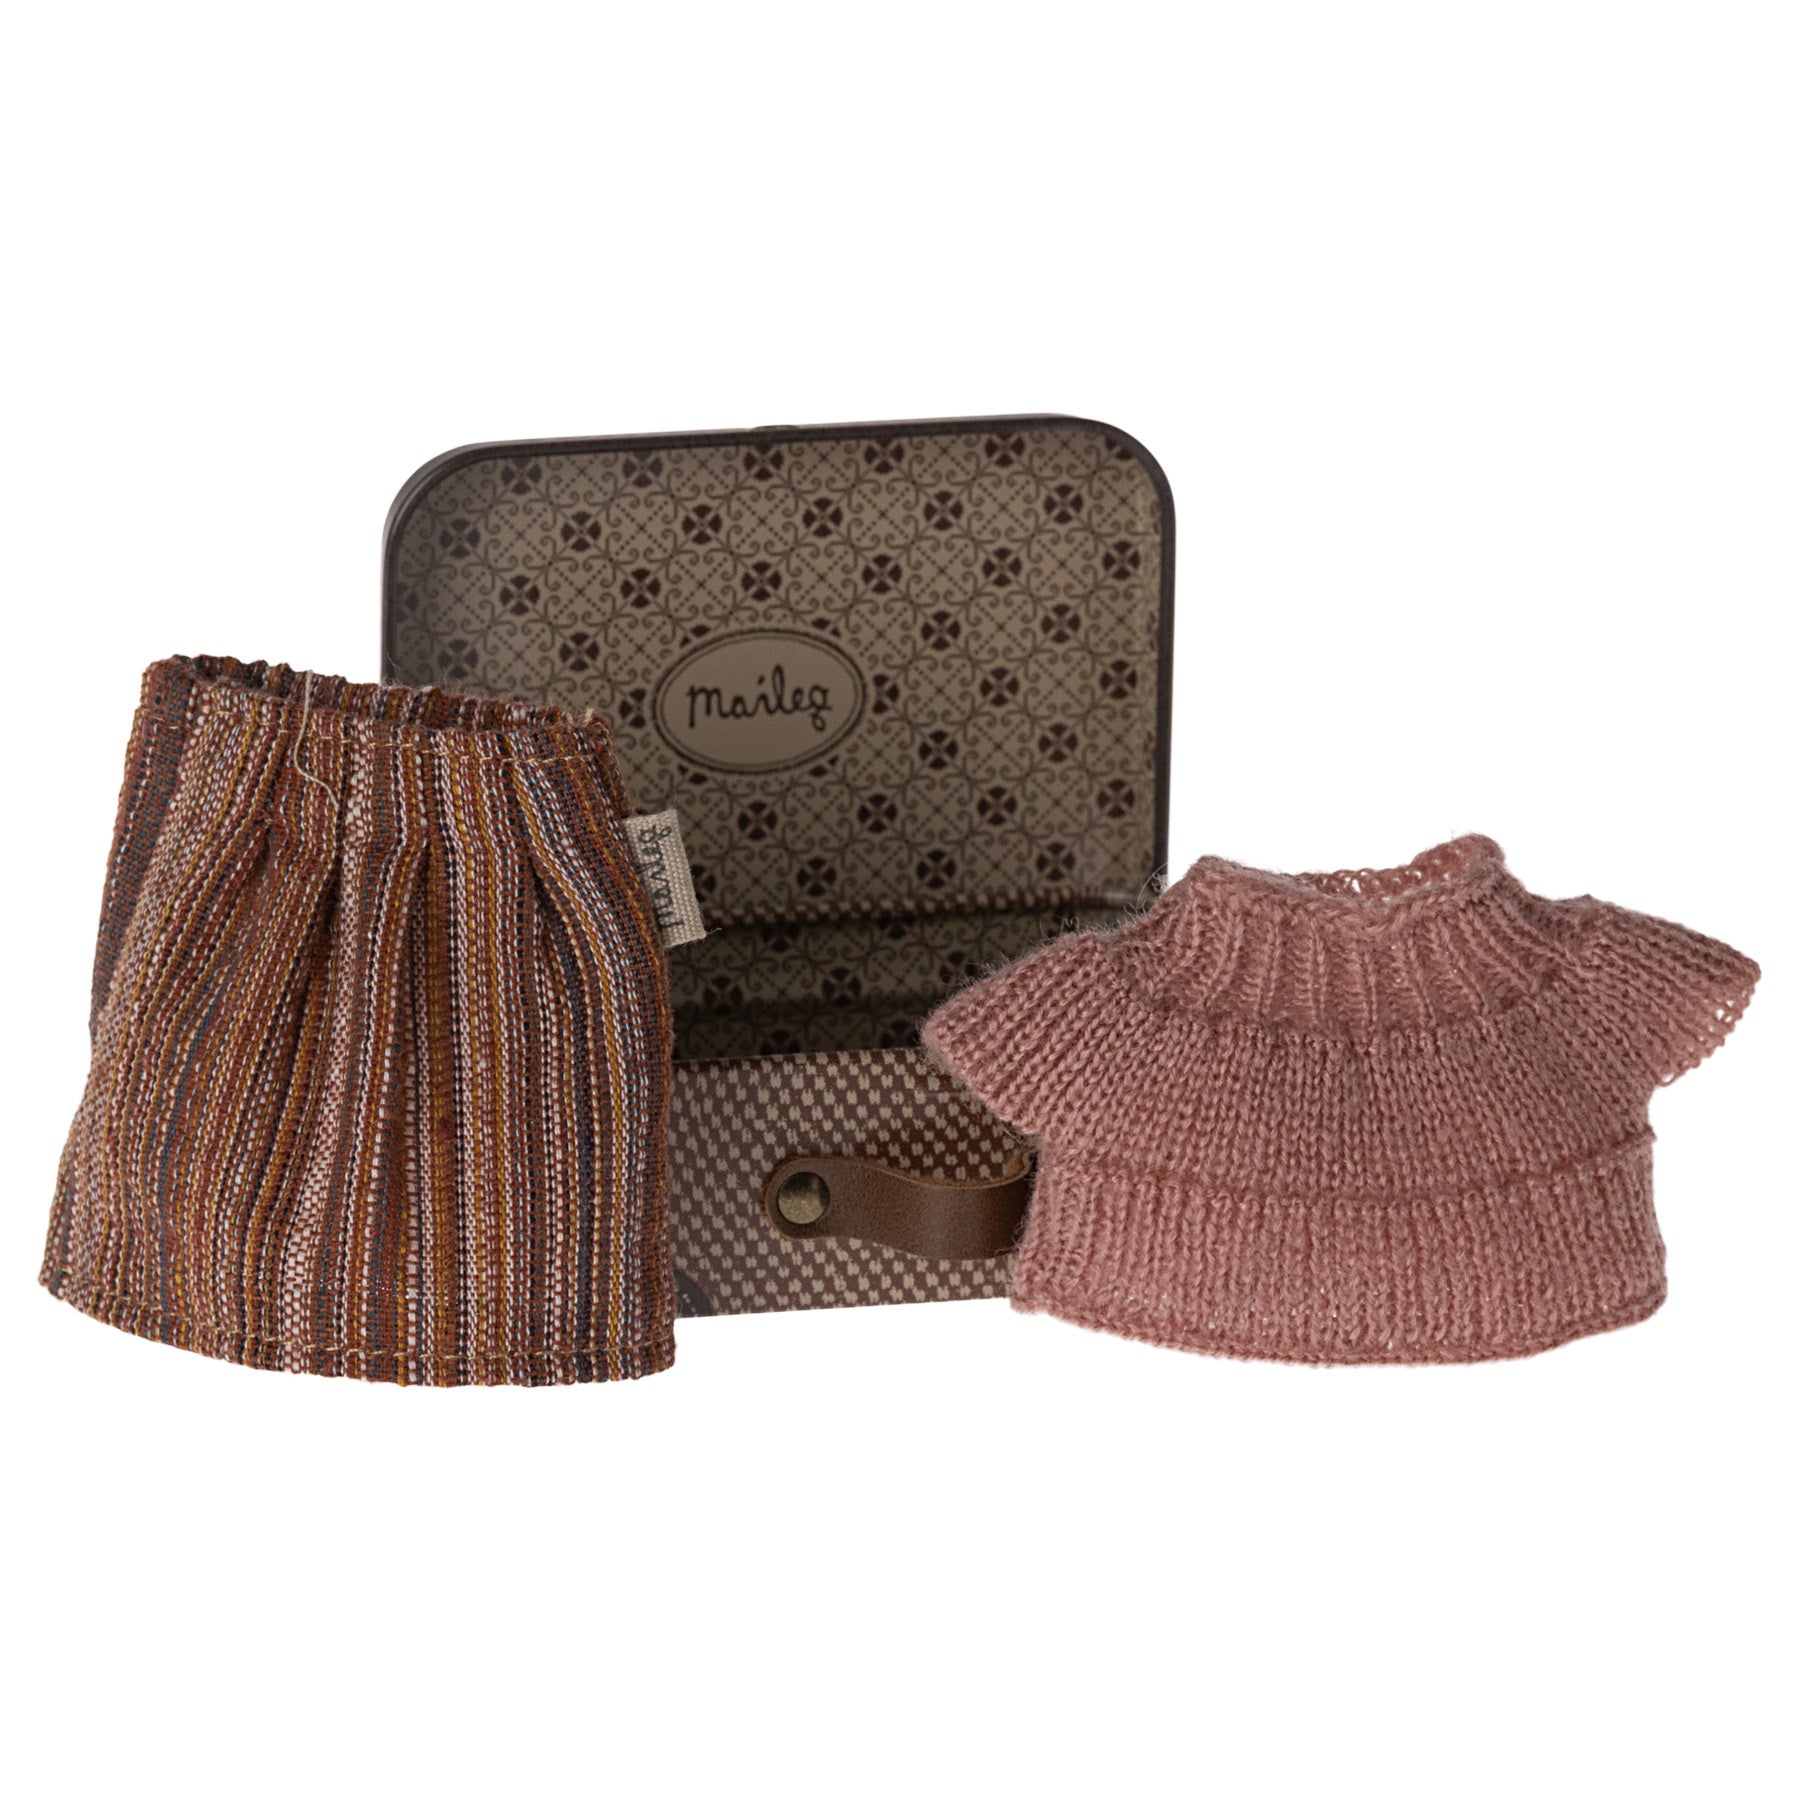 Maileg Knitted Blouse and Skirt in Suitcase, Grandma Mouse